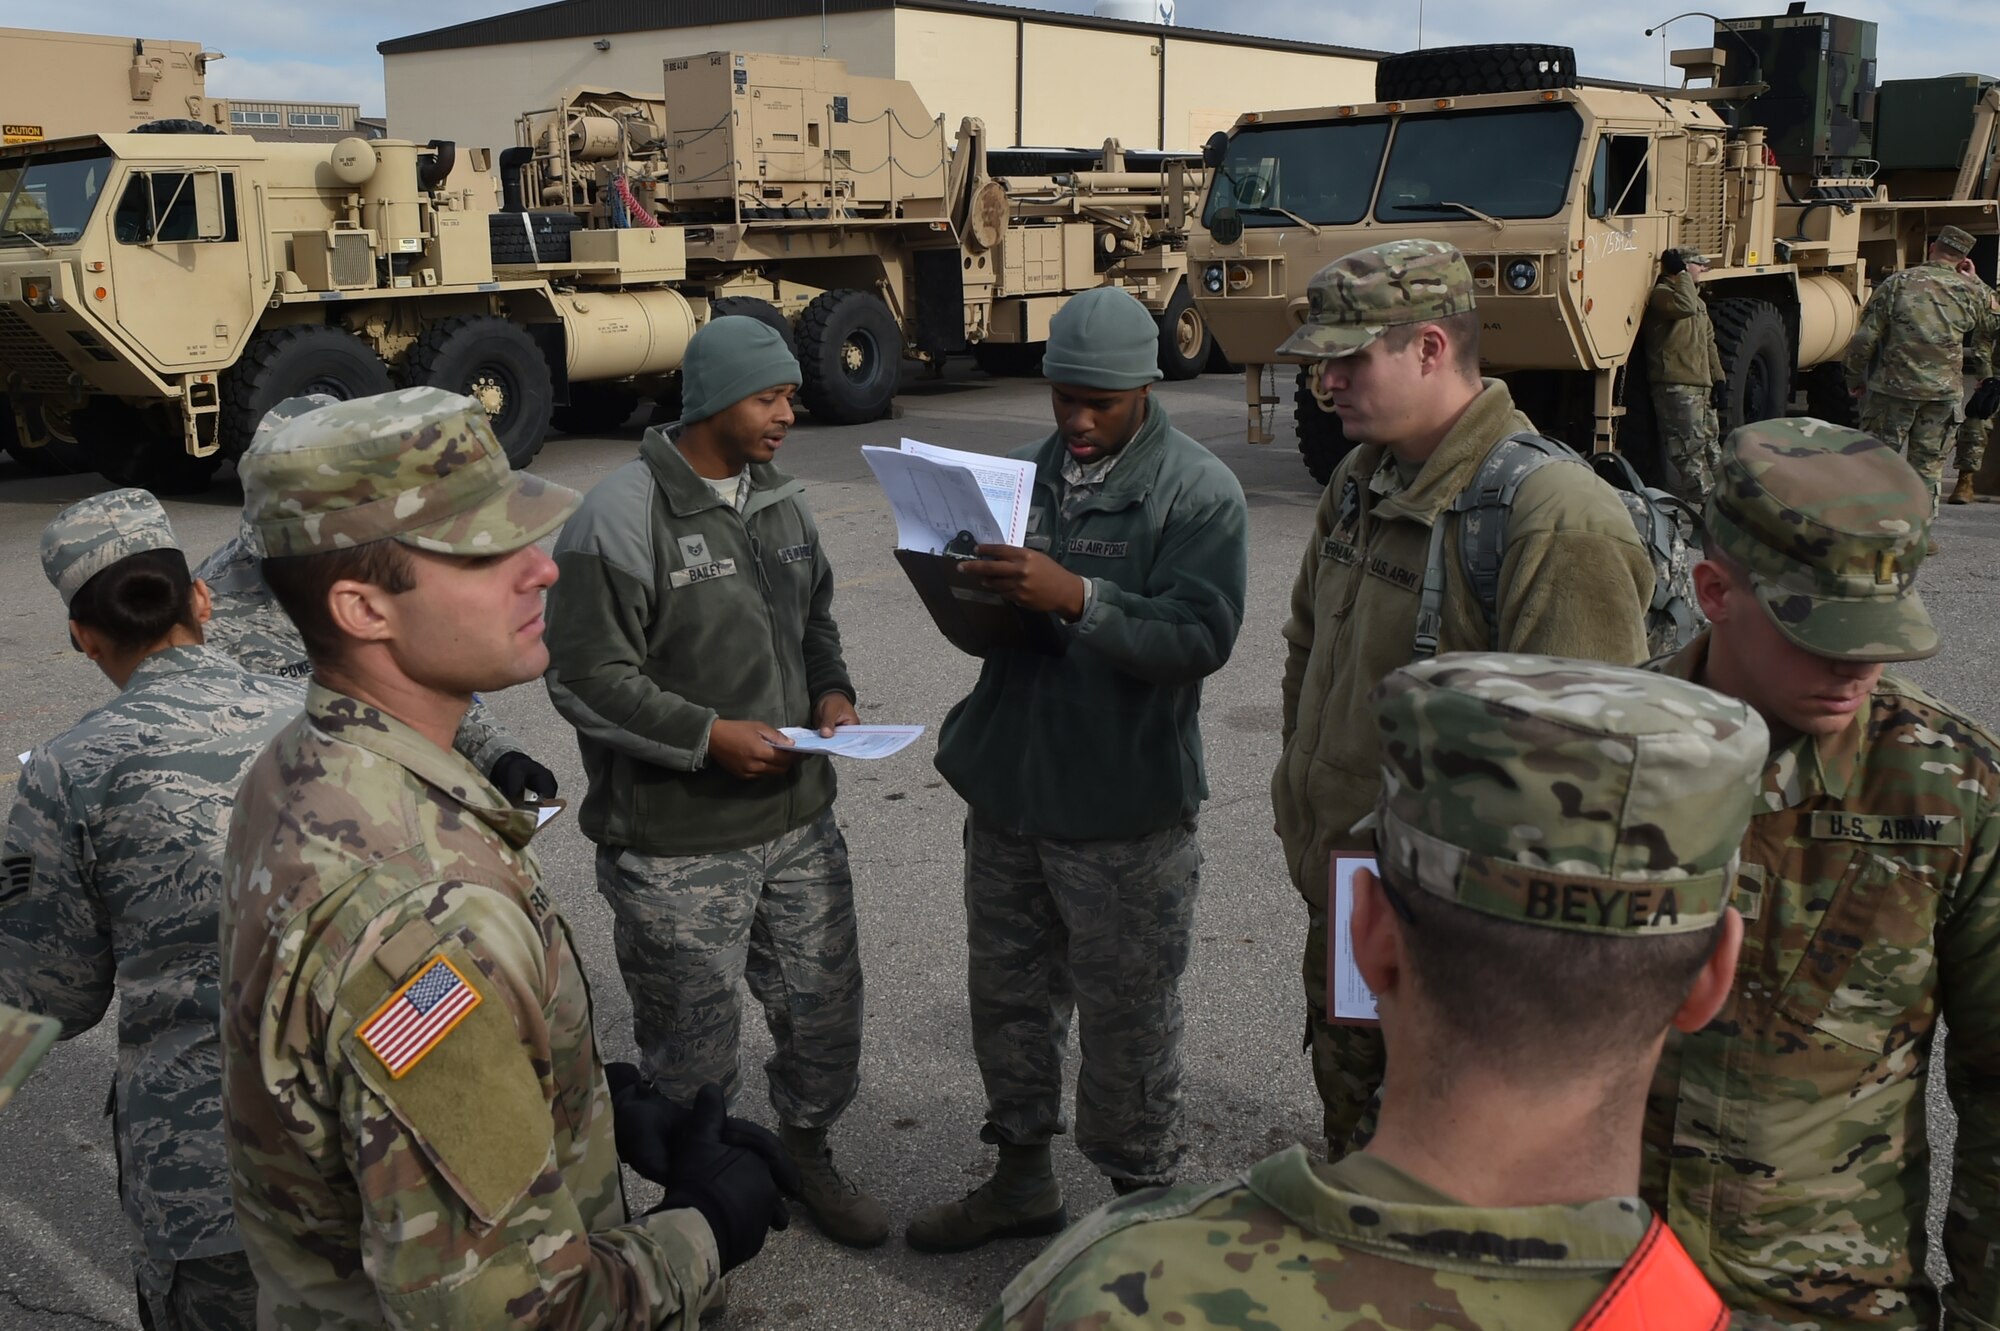 Members of the 97th Air Mobility Wing and the 4th Battalion, 3rd Air Defense Artillery Regiment prepare to inspect several vehicles during a joint exercise